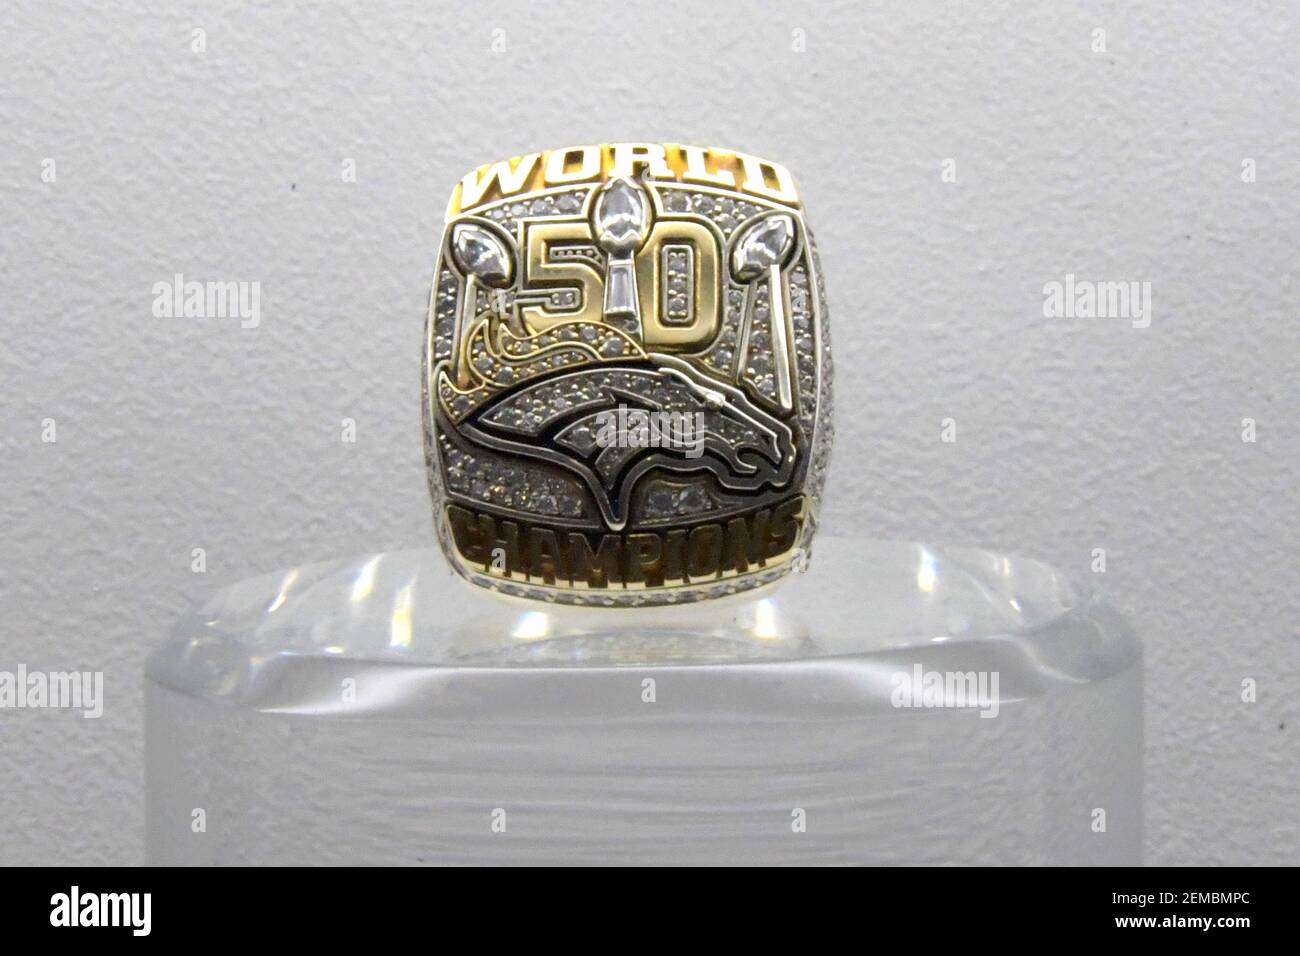 Feb 2, 2019; Atlanta, GA, USA; Detailed view of Super Bowl 50 ring to  commemorate the Denver Broncos 24-10 victory over the Carolina Panthers at  Levi's Stadium in Santa Clara, Calif. on